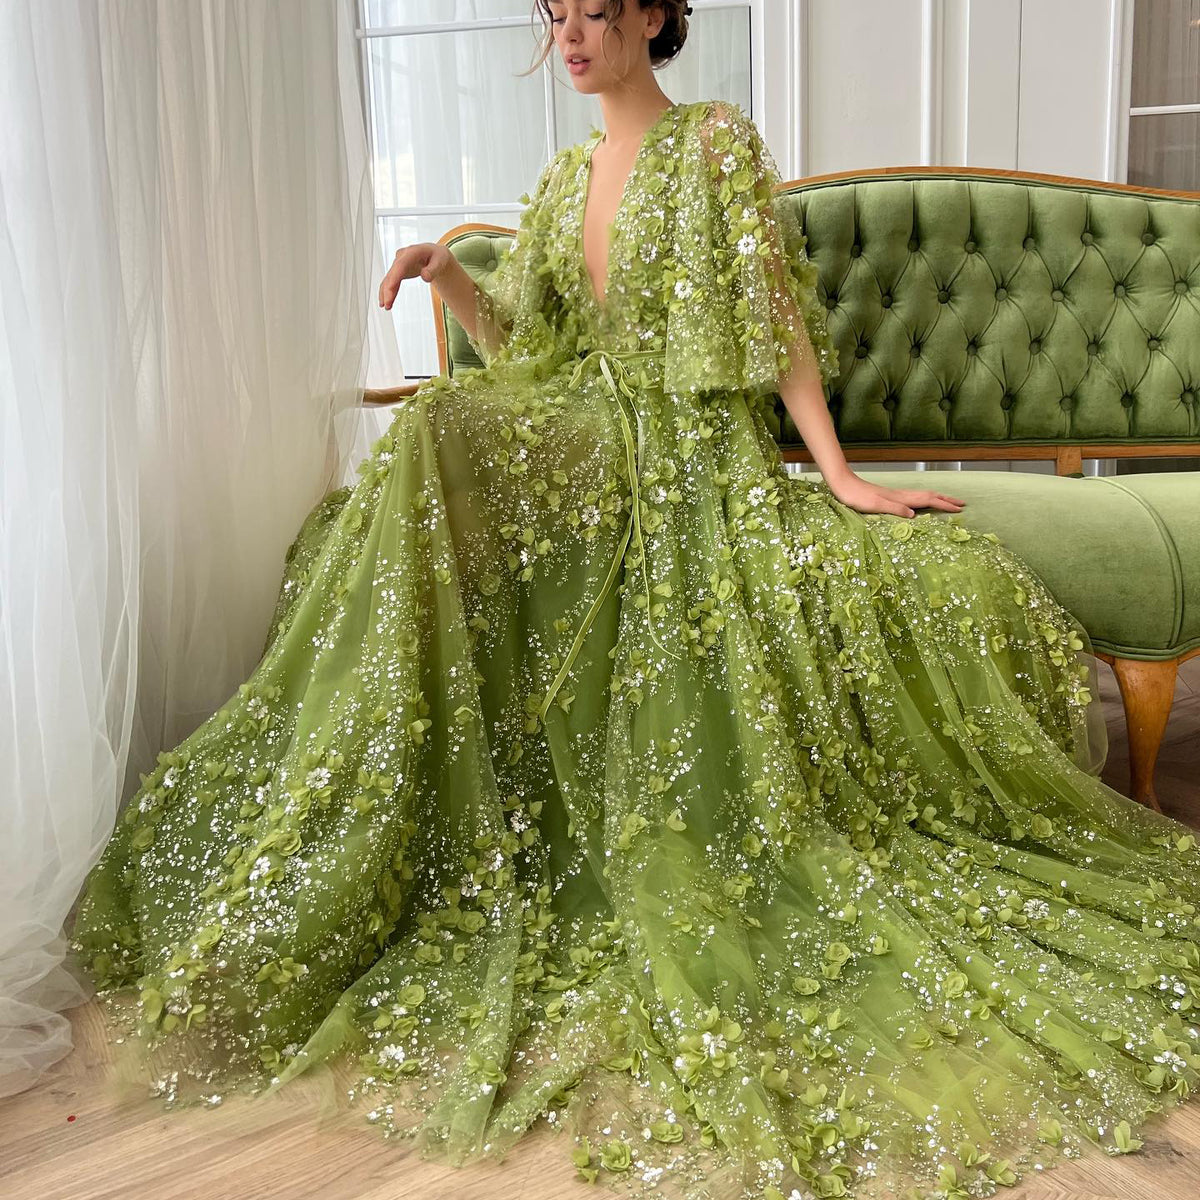 Sharon Said Sexy Plunging V-neck Green 3D Embroidered Flowers Evening Dress for Women Wedding Party Gowns SS354